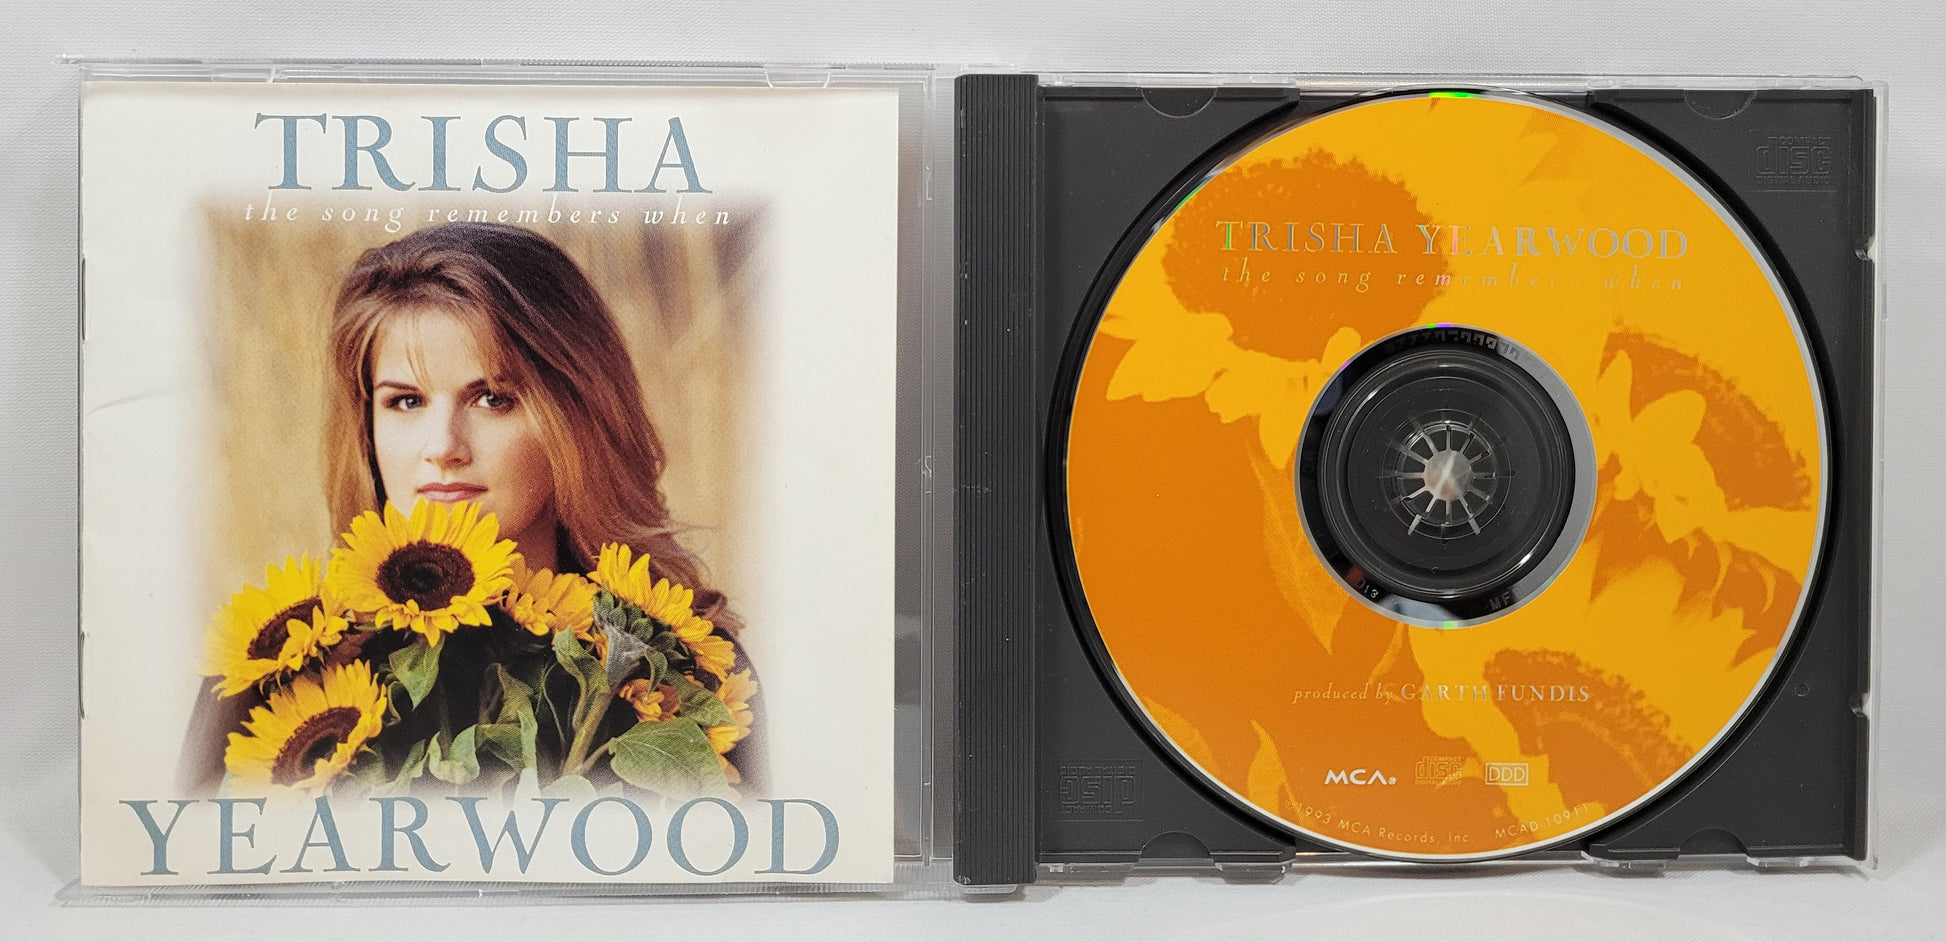 Trisha Yearwood - The Song Remembers When [1993 Used CD]